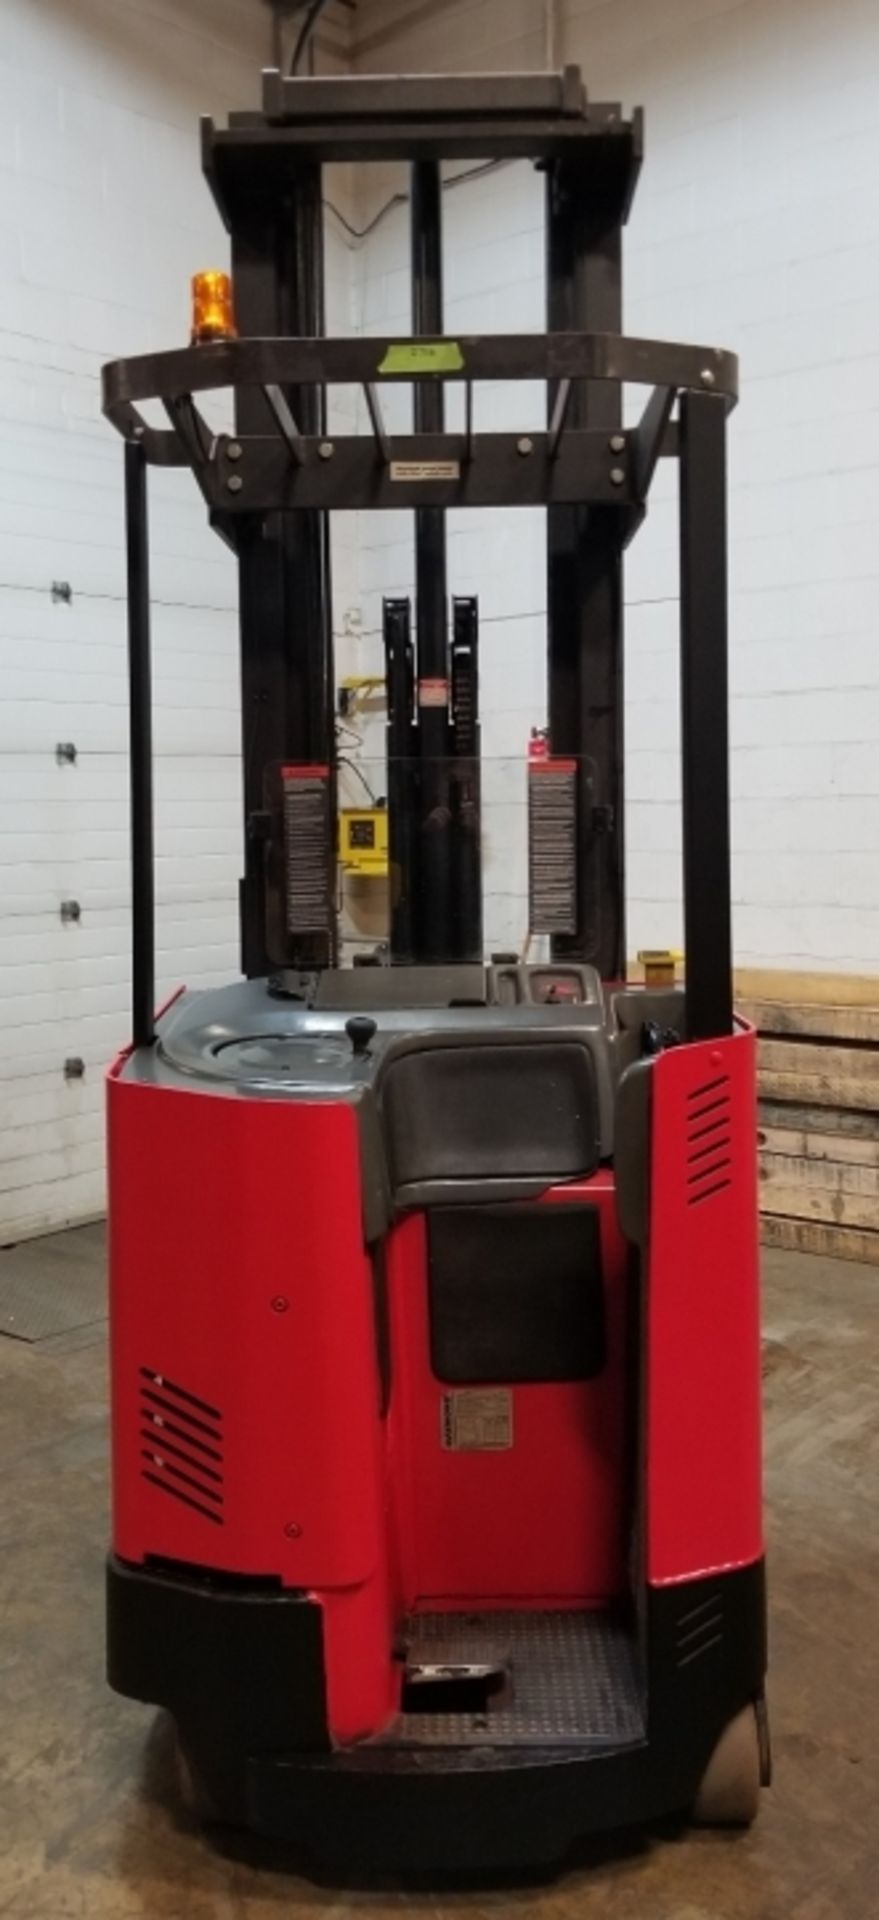 RAYMOND (1998) EZ-R40TT 36V ELECTRIC REACH TRUCK WITH 4000 LB. CAPACITY, 268" MAX. VERTICAL LIFT, - Image 4 of 5